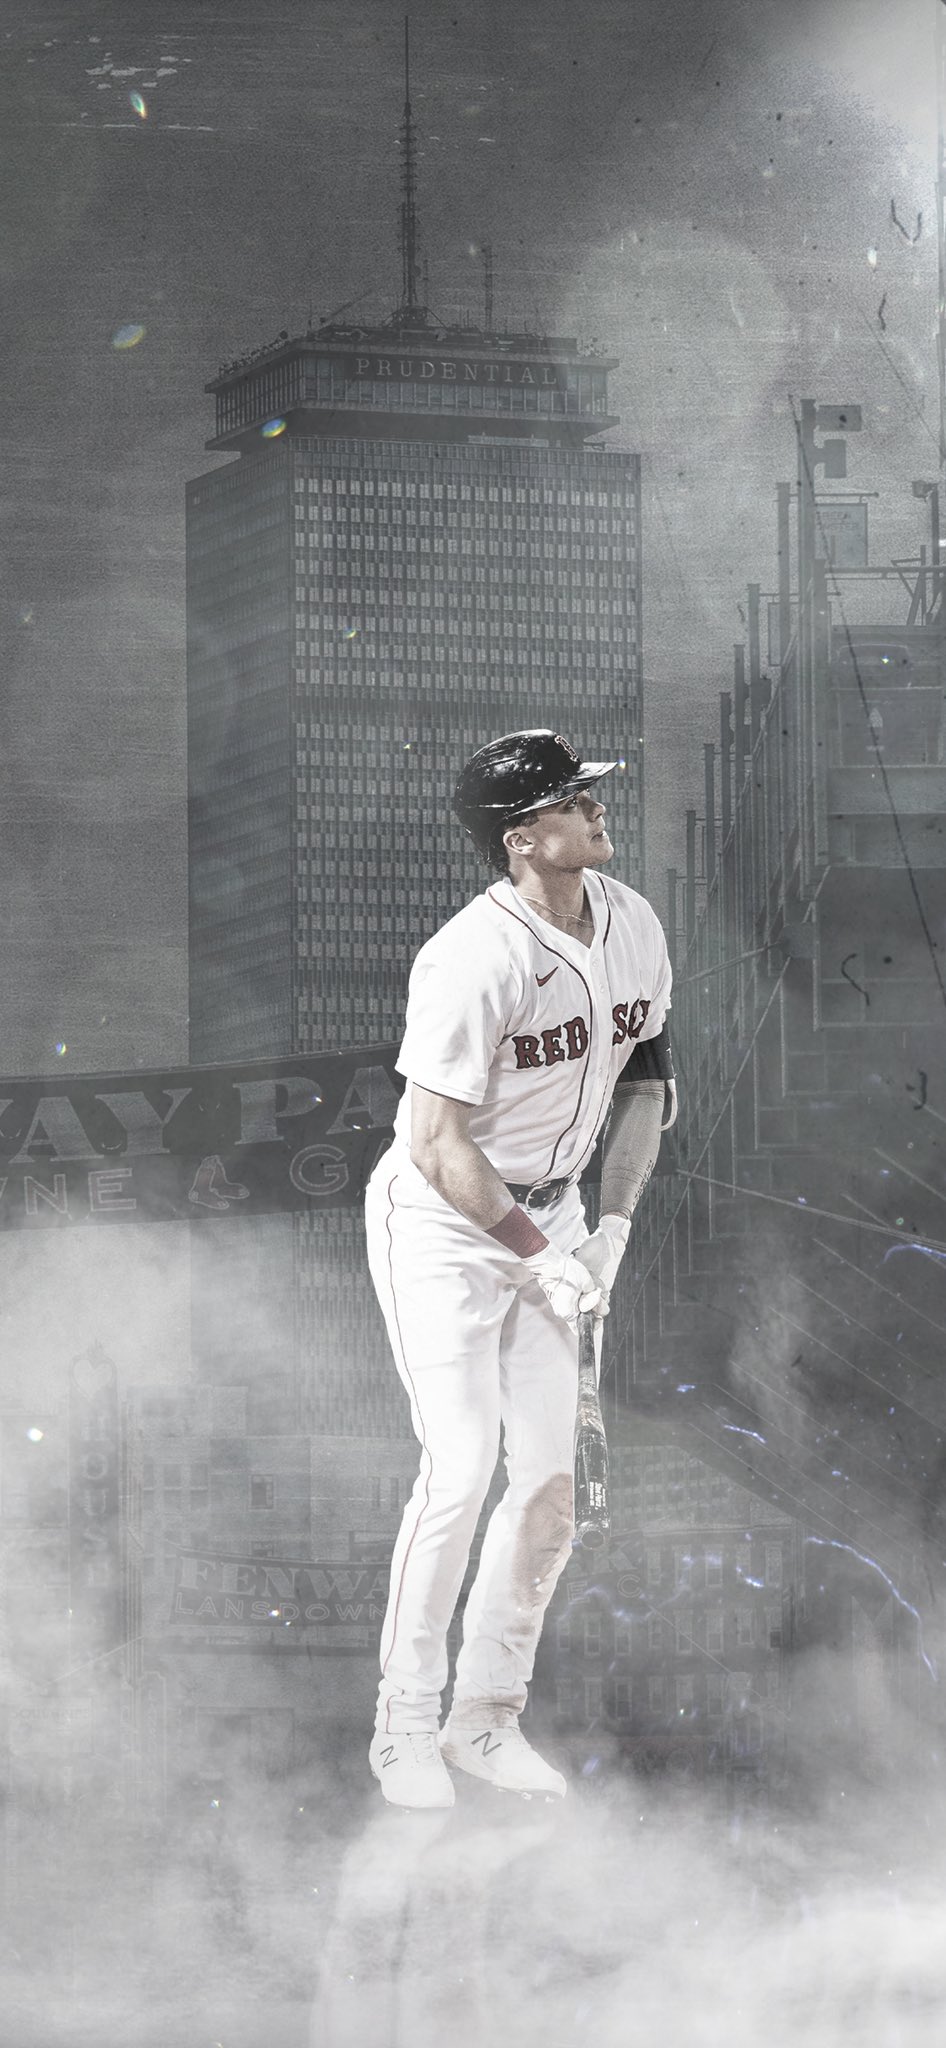 Boston Red Sox - Some Wallpaper Wednesday to get you